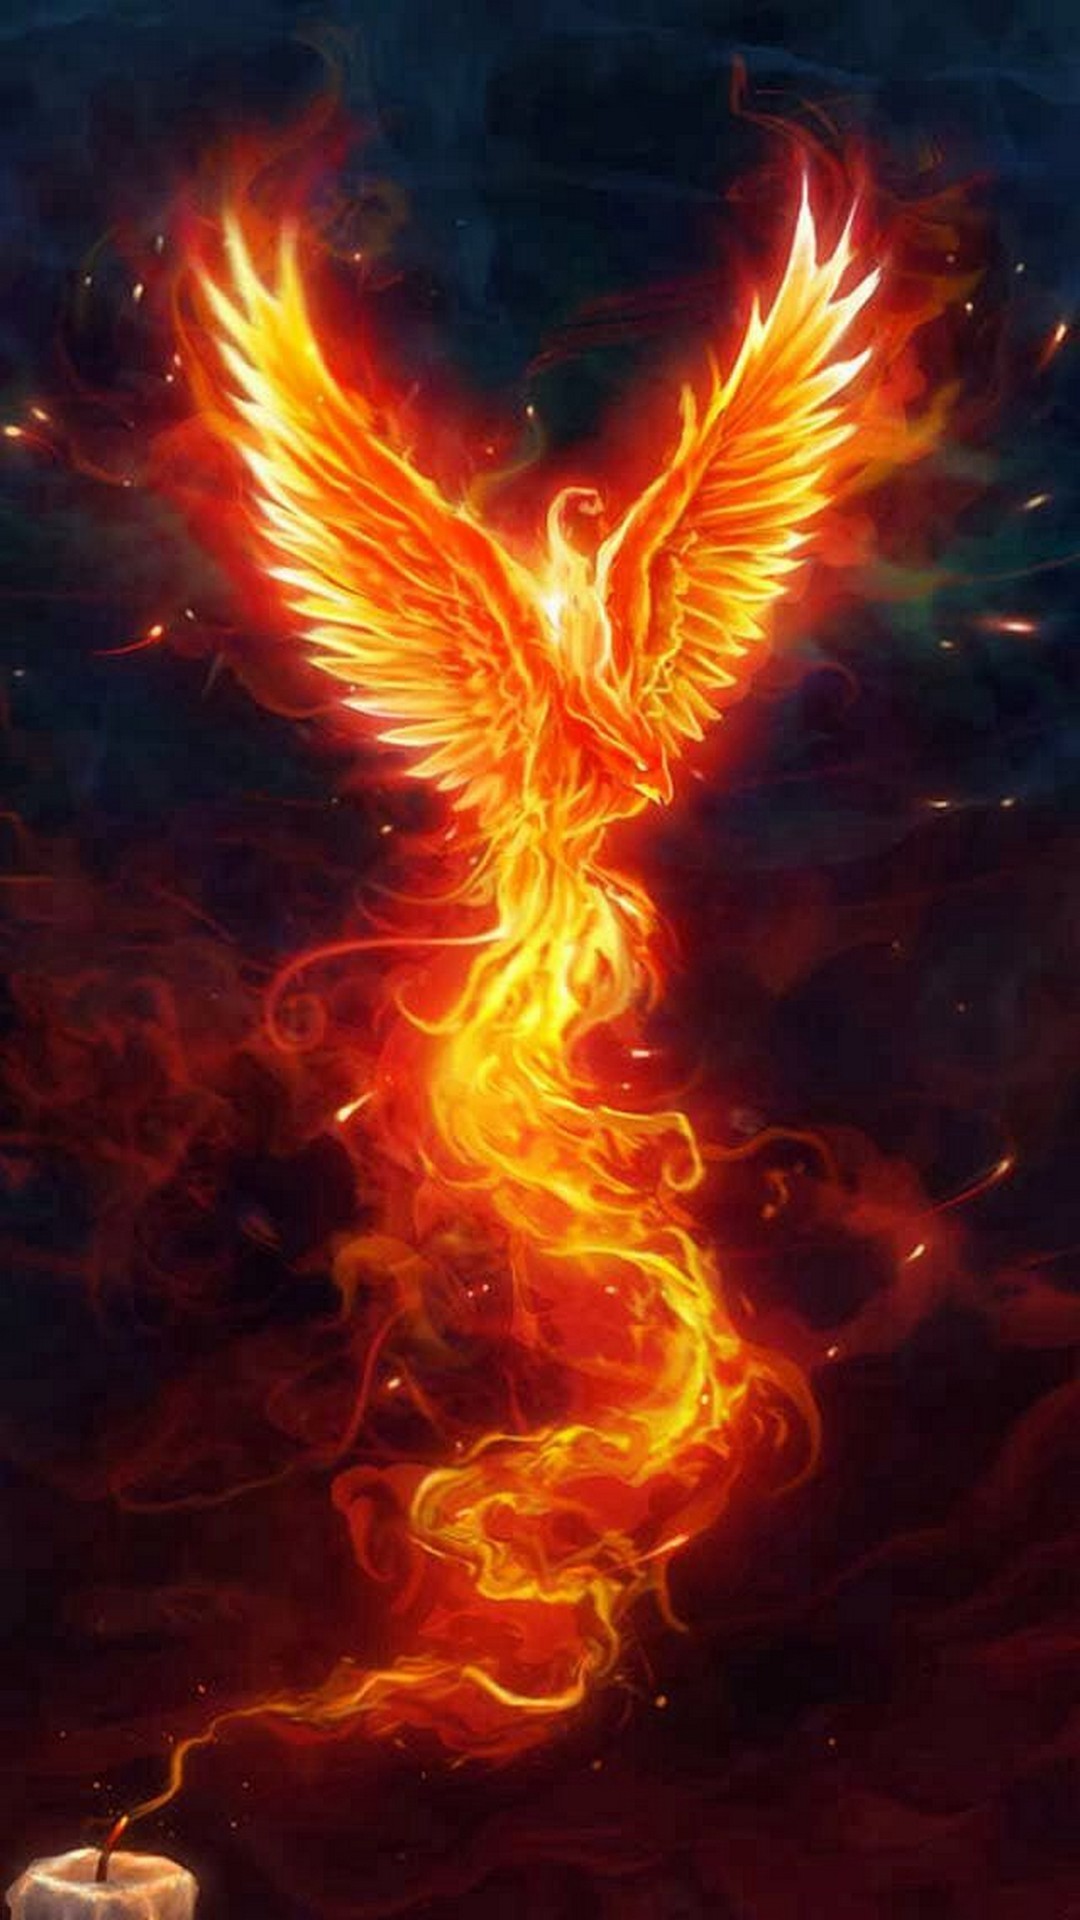 Wallpaper Android Phoenix with resolution 1080X1920 pixel. You can make this wallpaper for your Android backgrounds, Tablet, Smartphones Screensavers and Mobile Phone Lock Screen